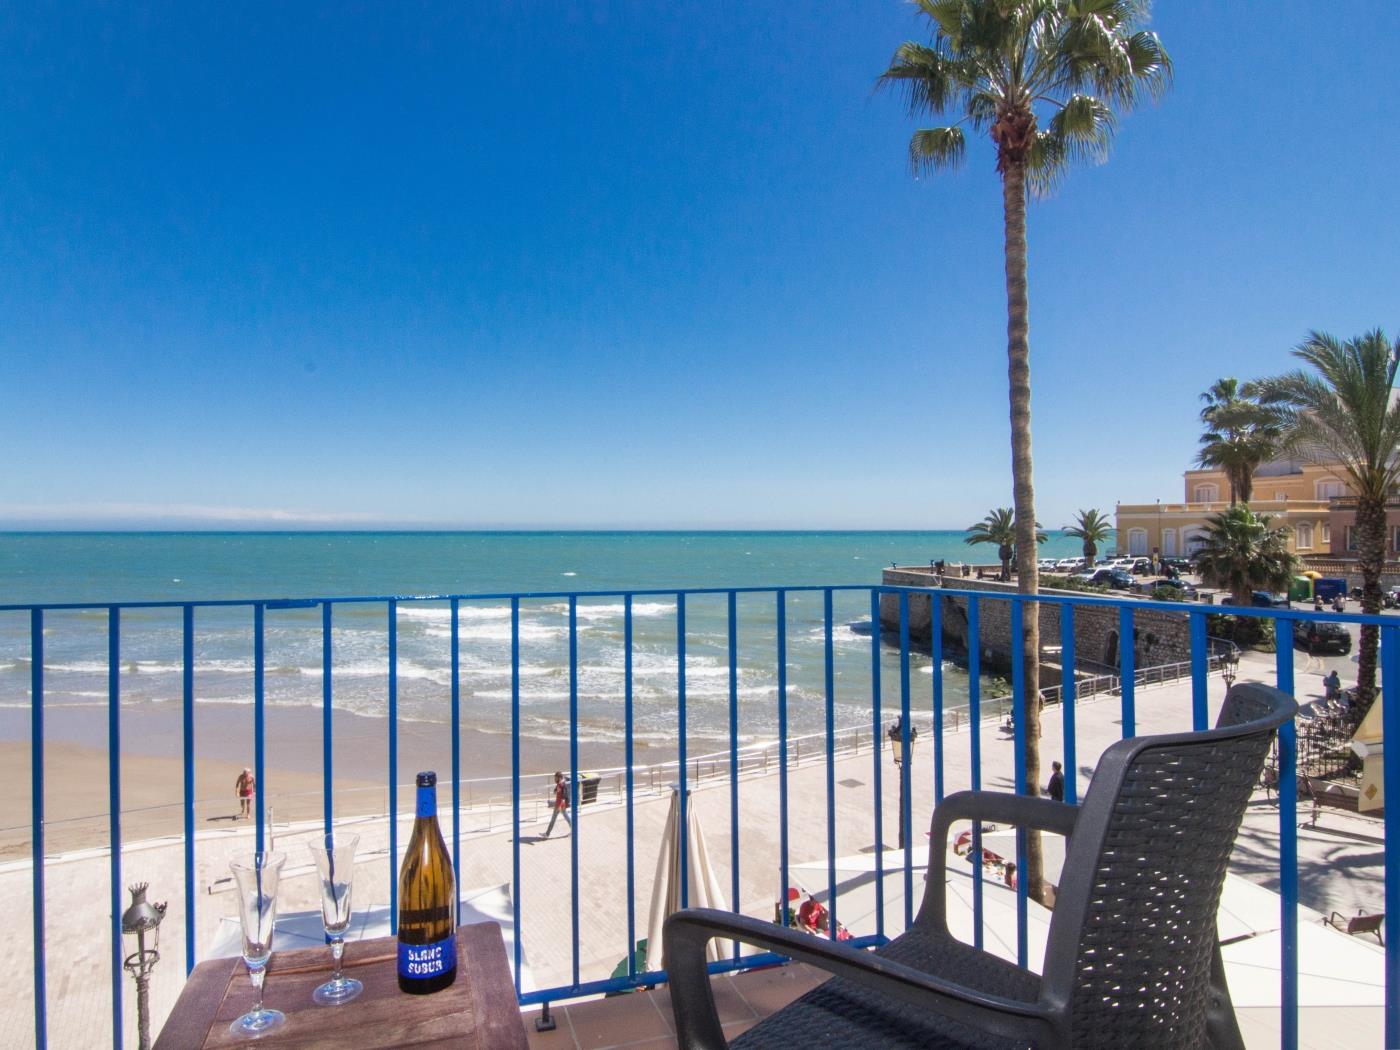 SUNBEAM BY BLAUSITGES Romantic beach front apartment in Sitges. in SITGES